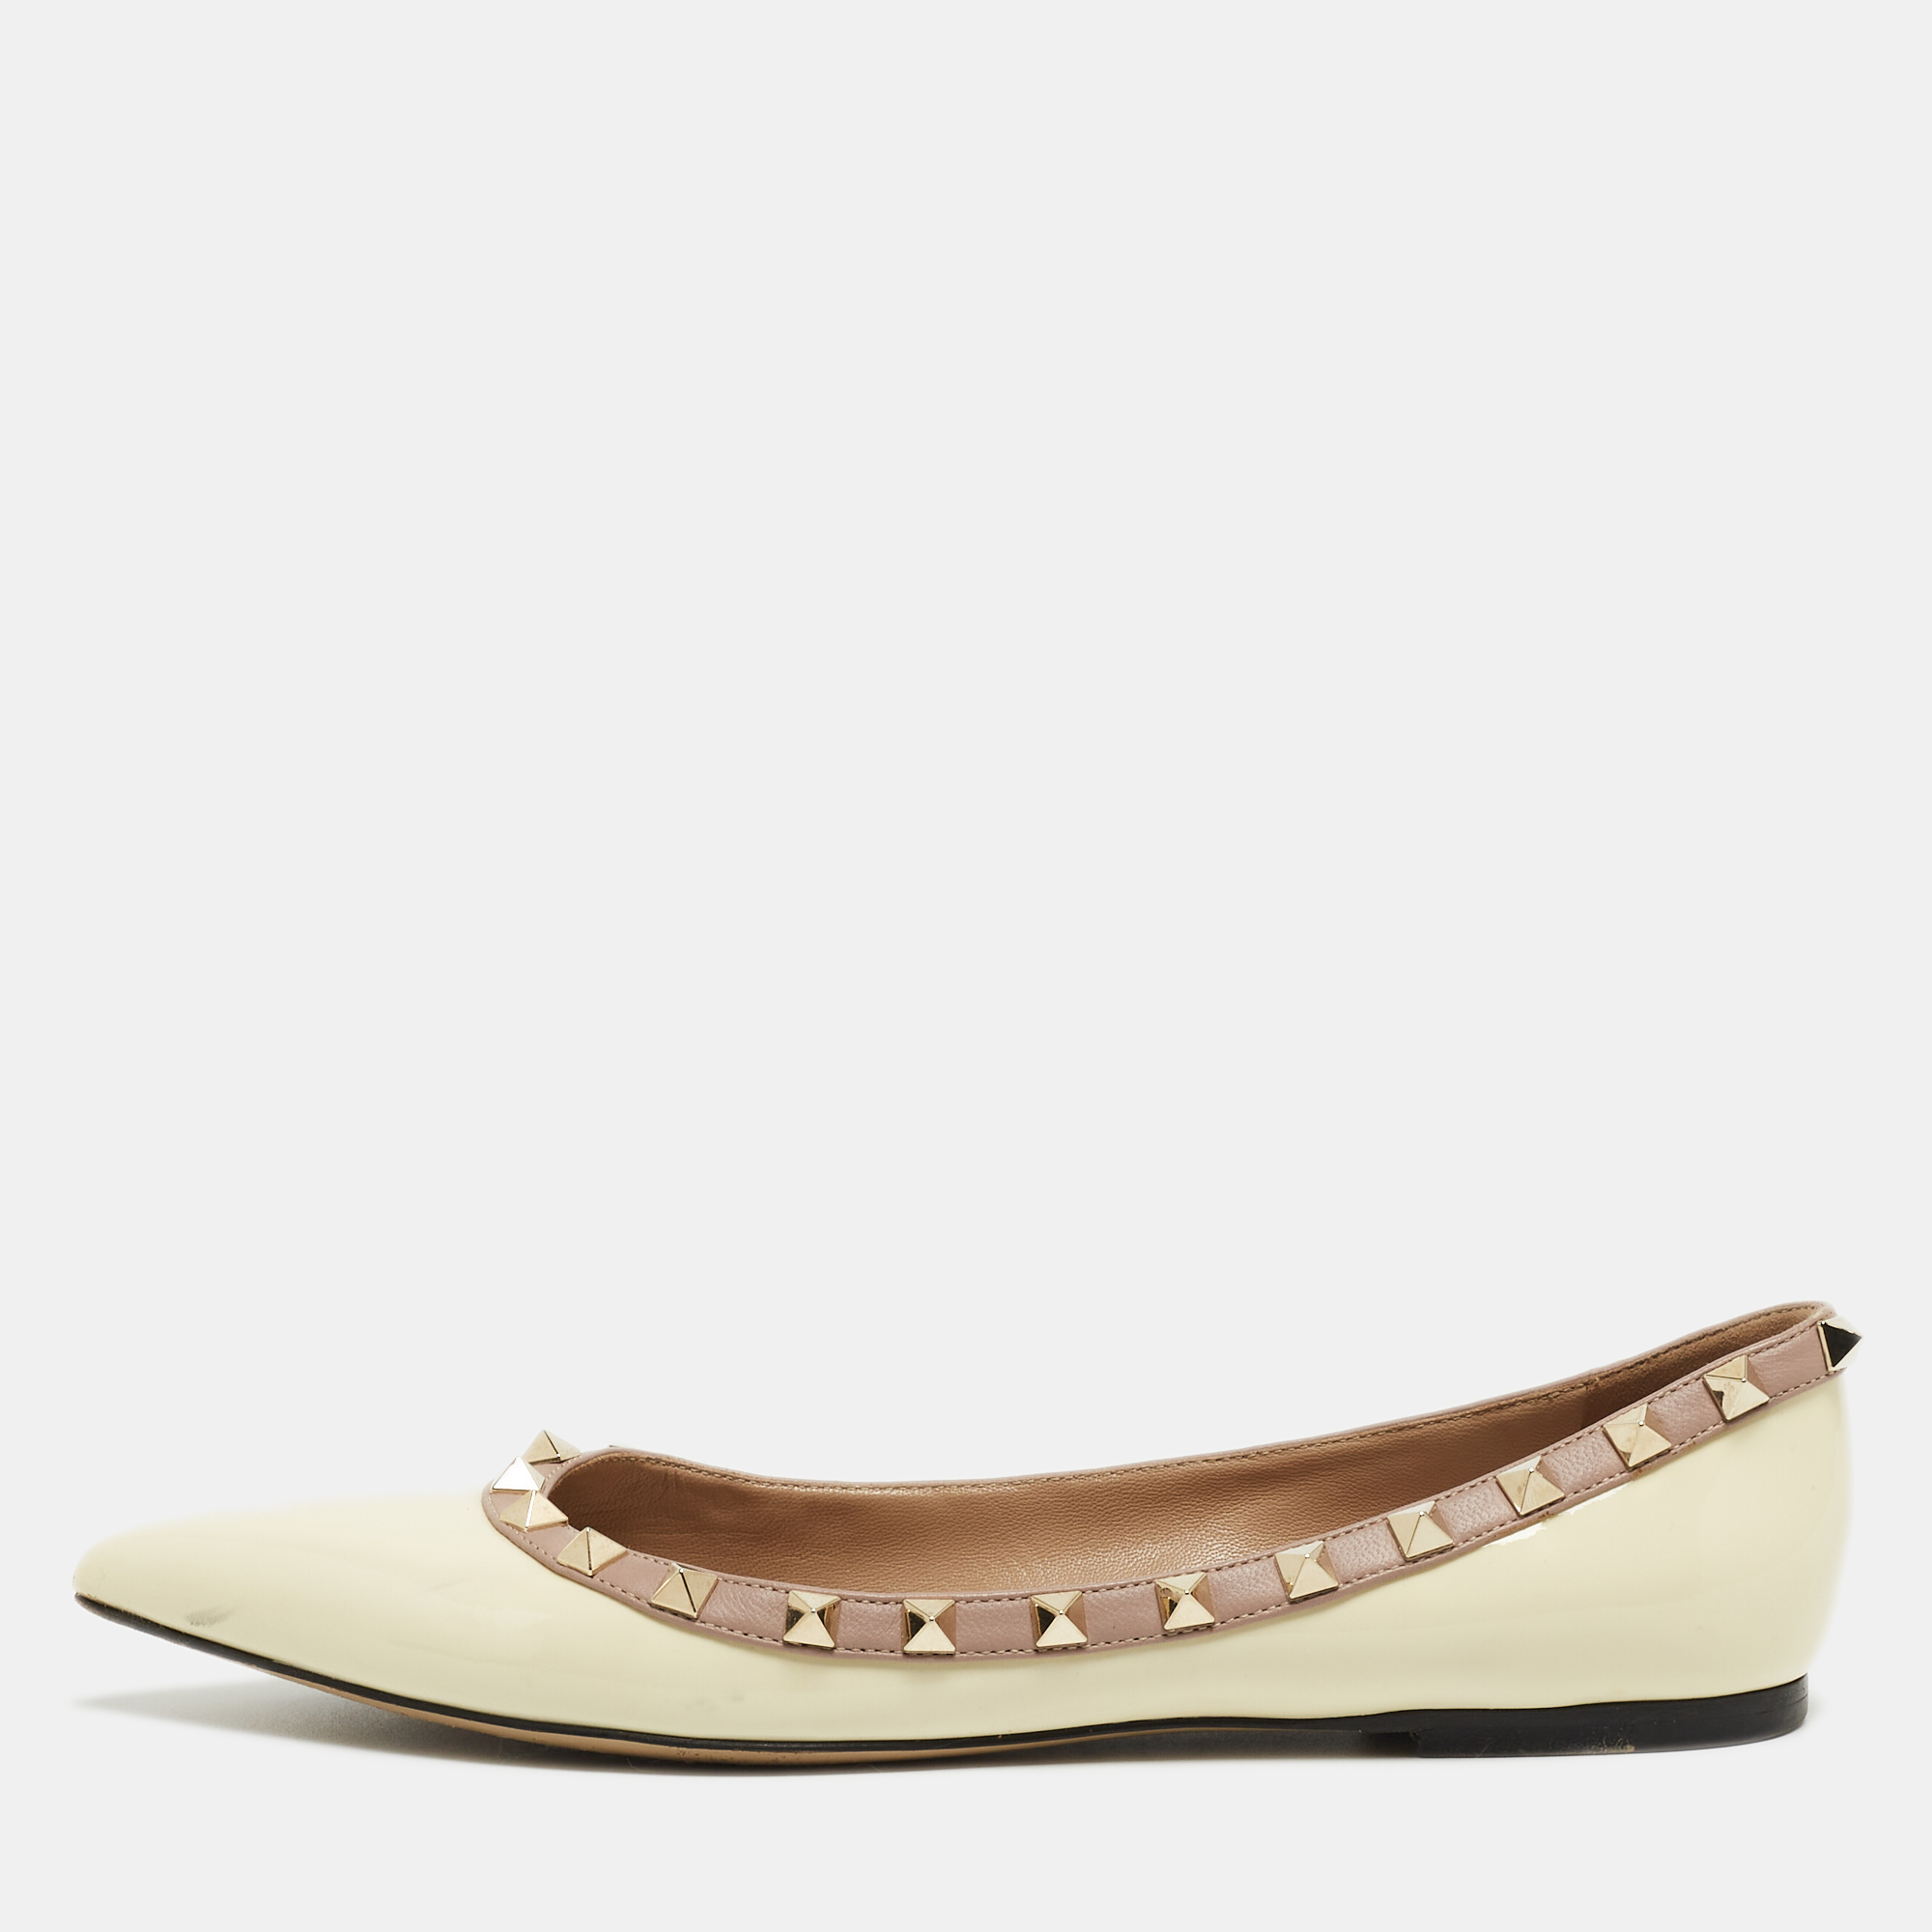 Valentino Cream Leather And Patent Rockstud Ballet Flats Size 38